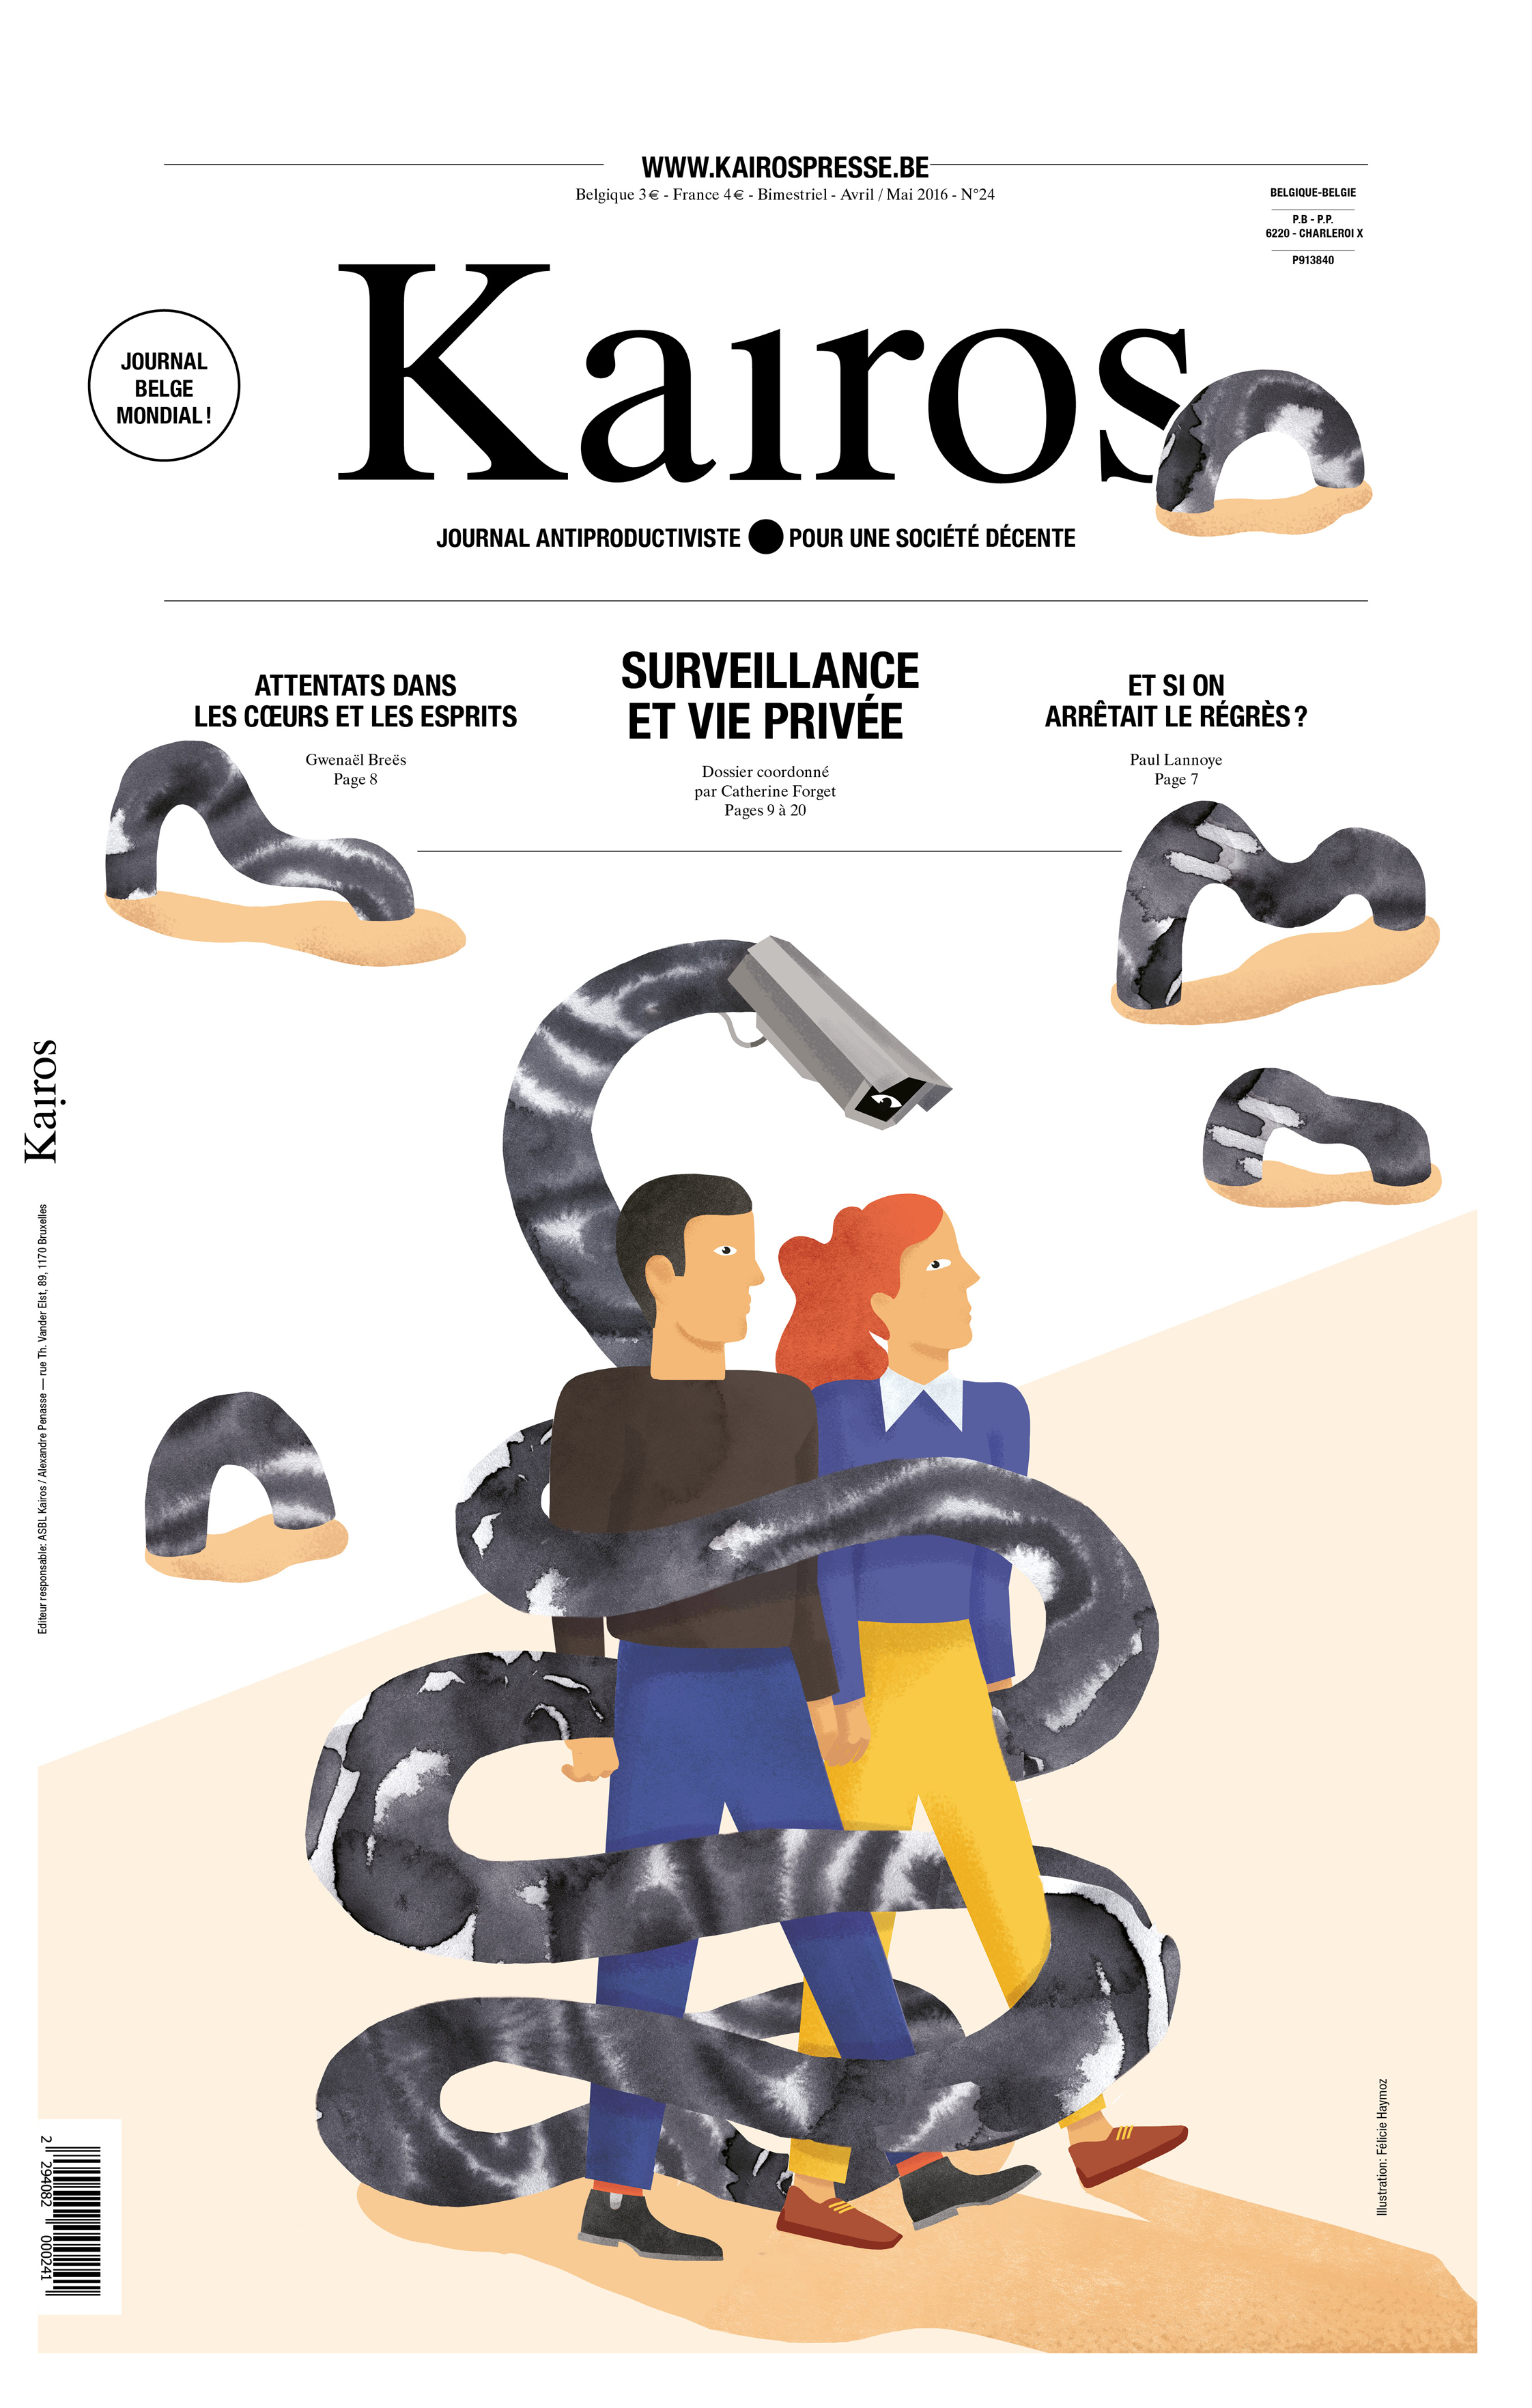  Cover for the Kairos Magazine Issue 24 about surveillance and privacy 